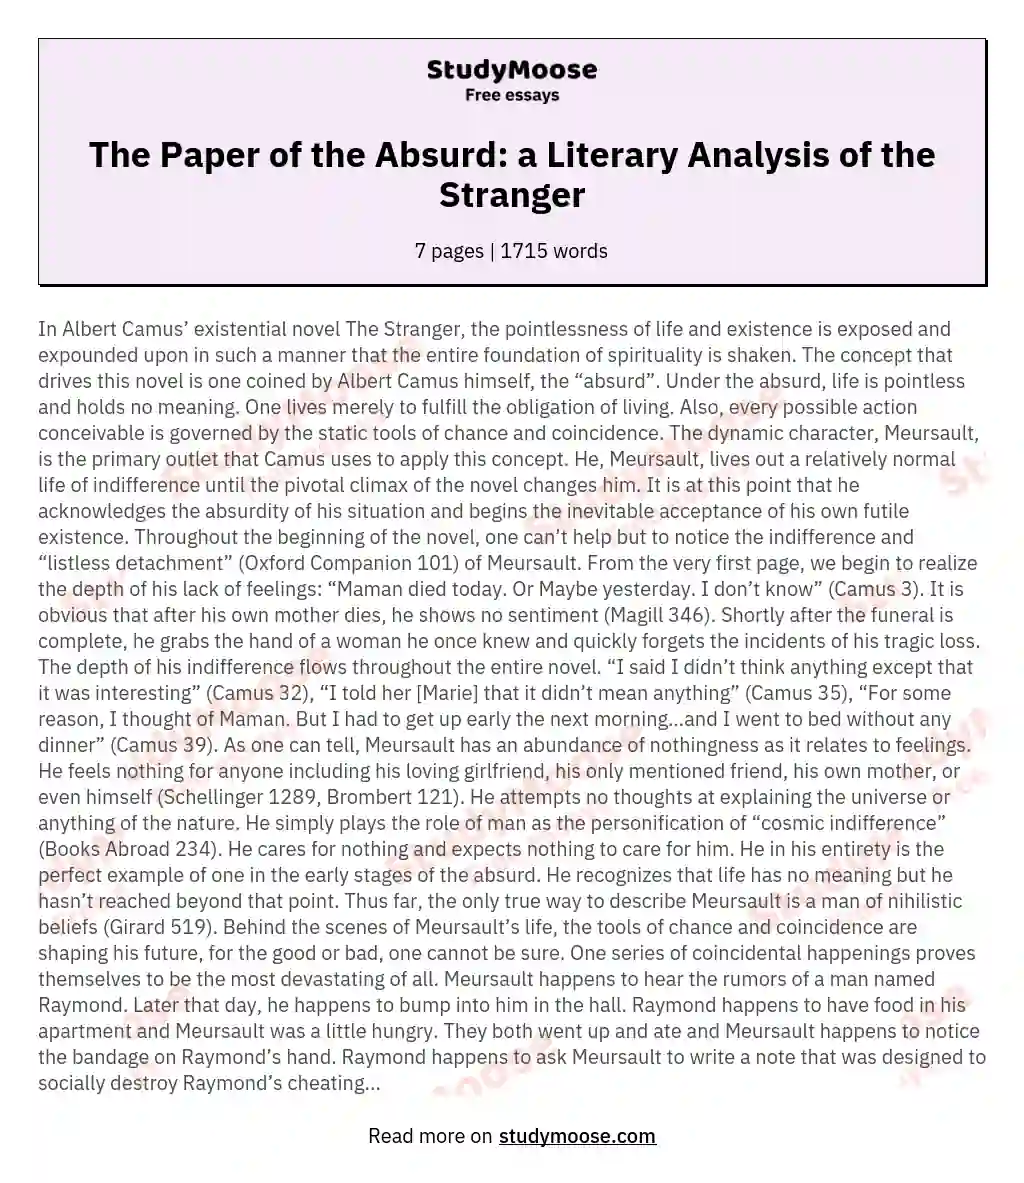 The Paper of the Absurd: a Literary Analysis of the Stranger essay